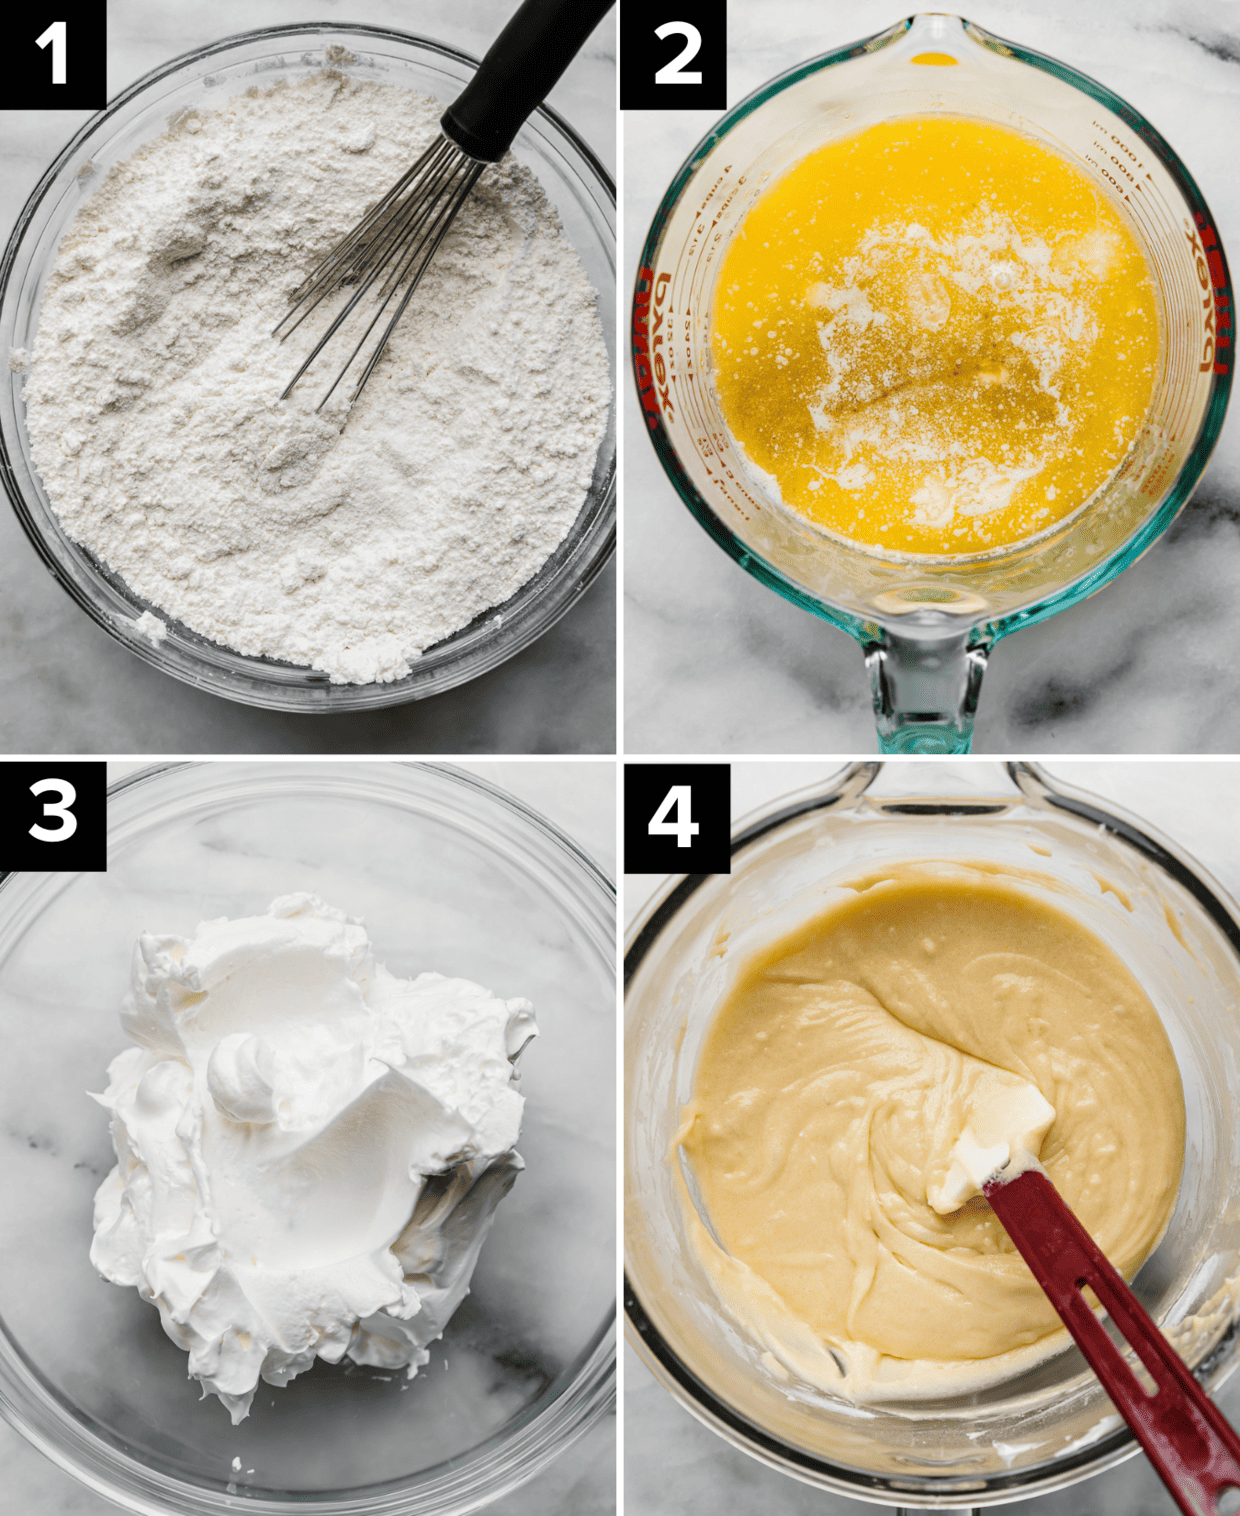 Four photos showing steps to making a yellow cake with cake flour: top left image is dry ingredients in a bowl, top right photo is melted butter and buttermilk in glass measuring cup, bottom left image is whipped egg whites, bottom right image is a yellow cake batter in a bowl.